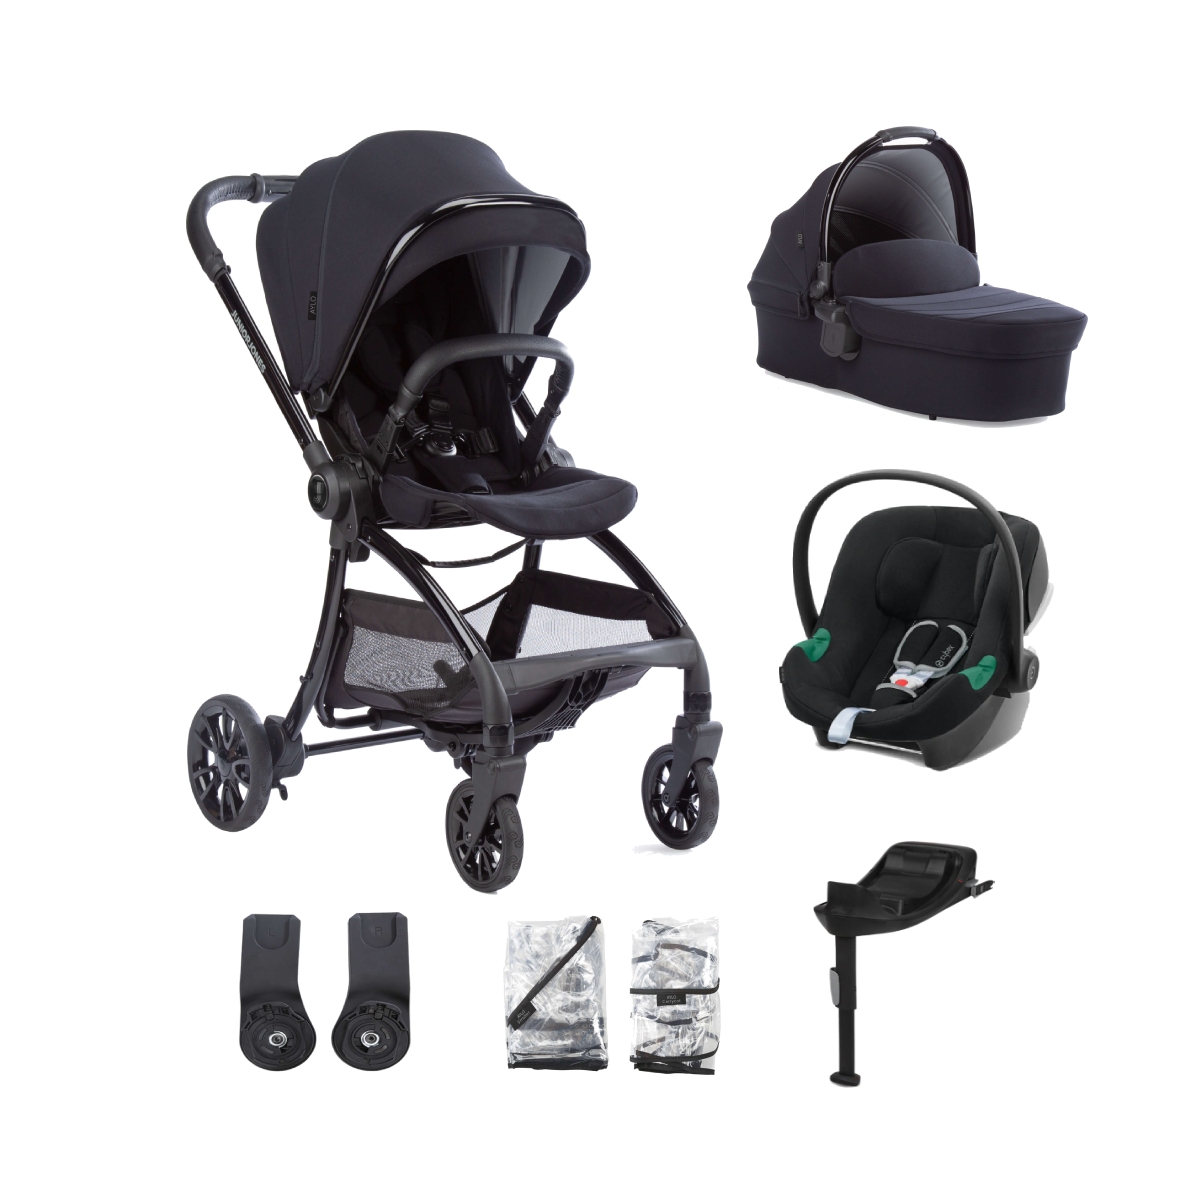 Junior Jones Aylo 7 Piece Travel System with Cybex Aton B2 Car seat and Base One